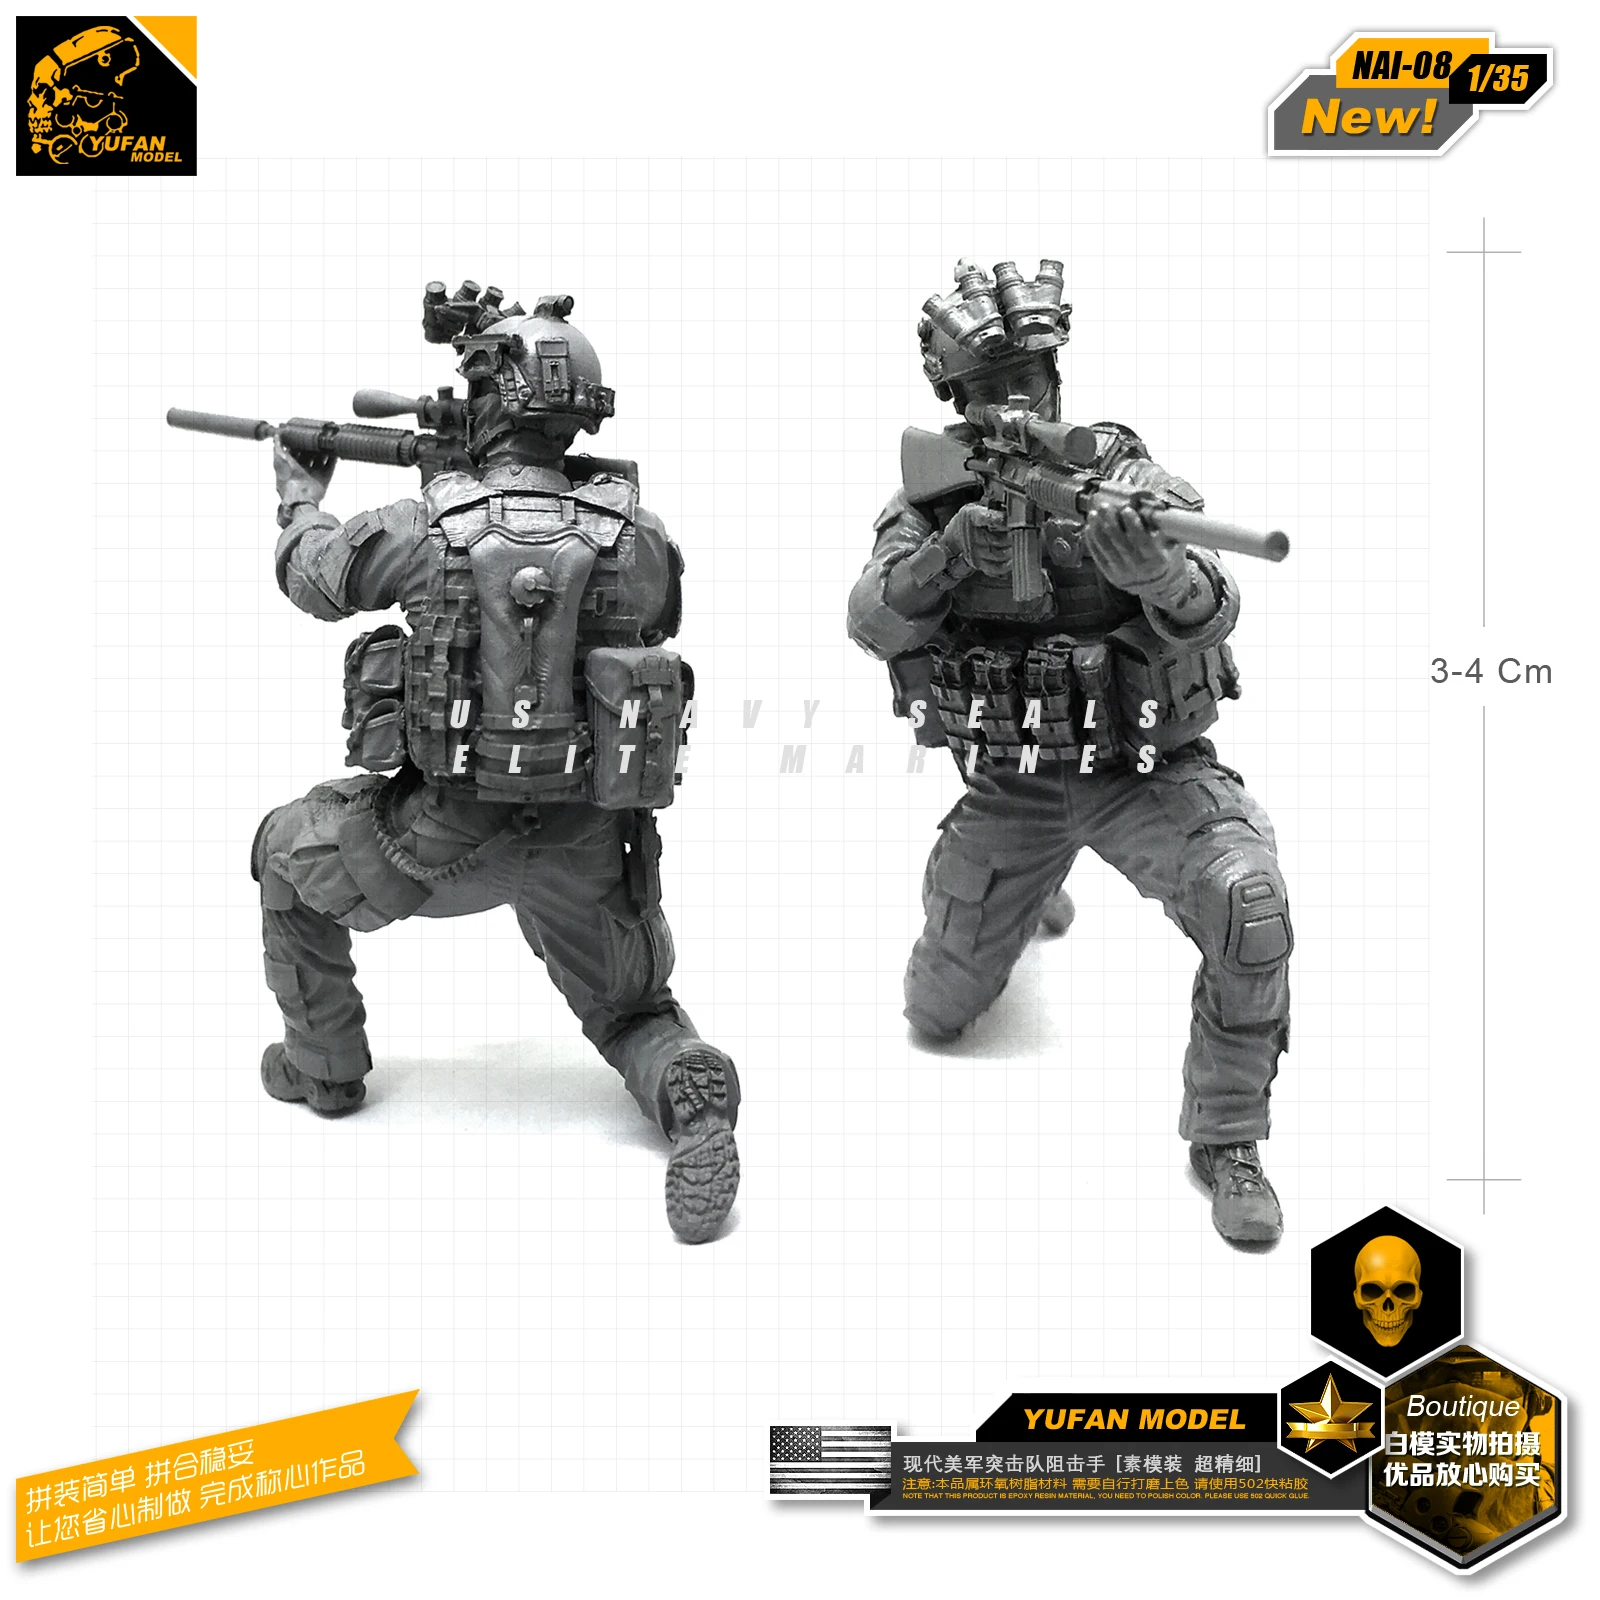 Details about   1/35 Soldier Figurine Military Model Resin Figure Kit USA Commando Unpainted 